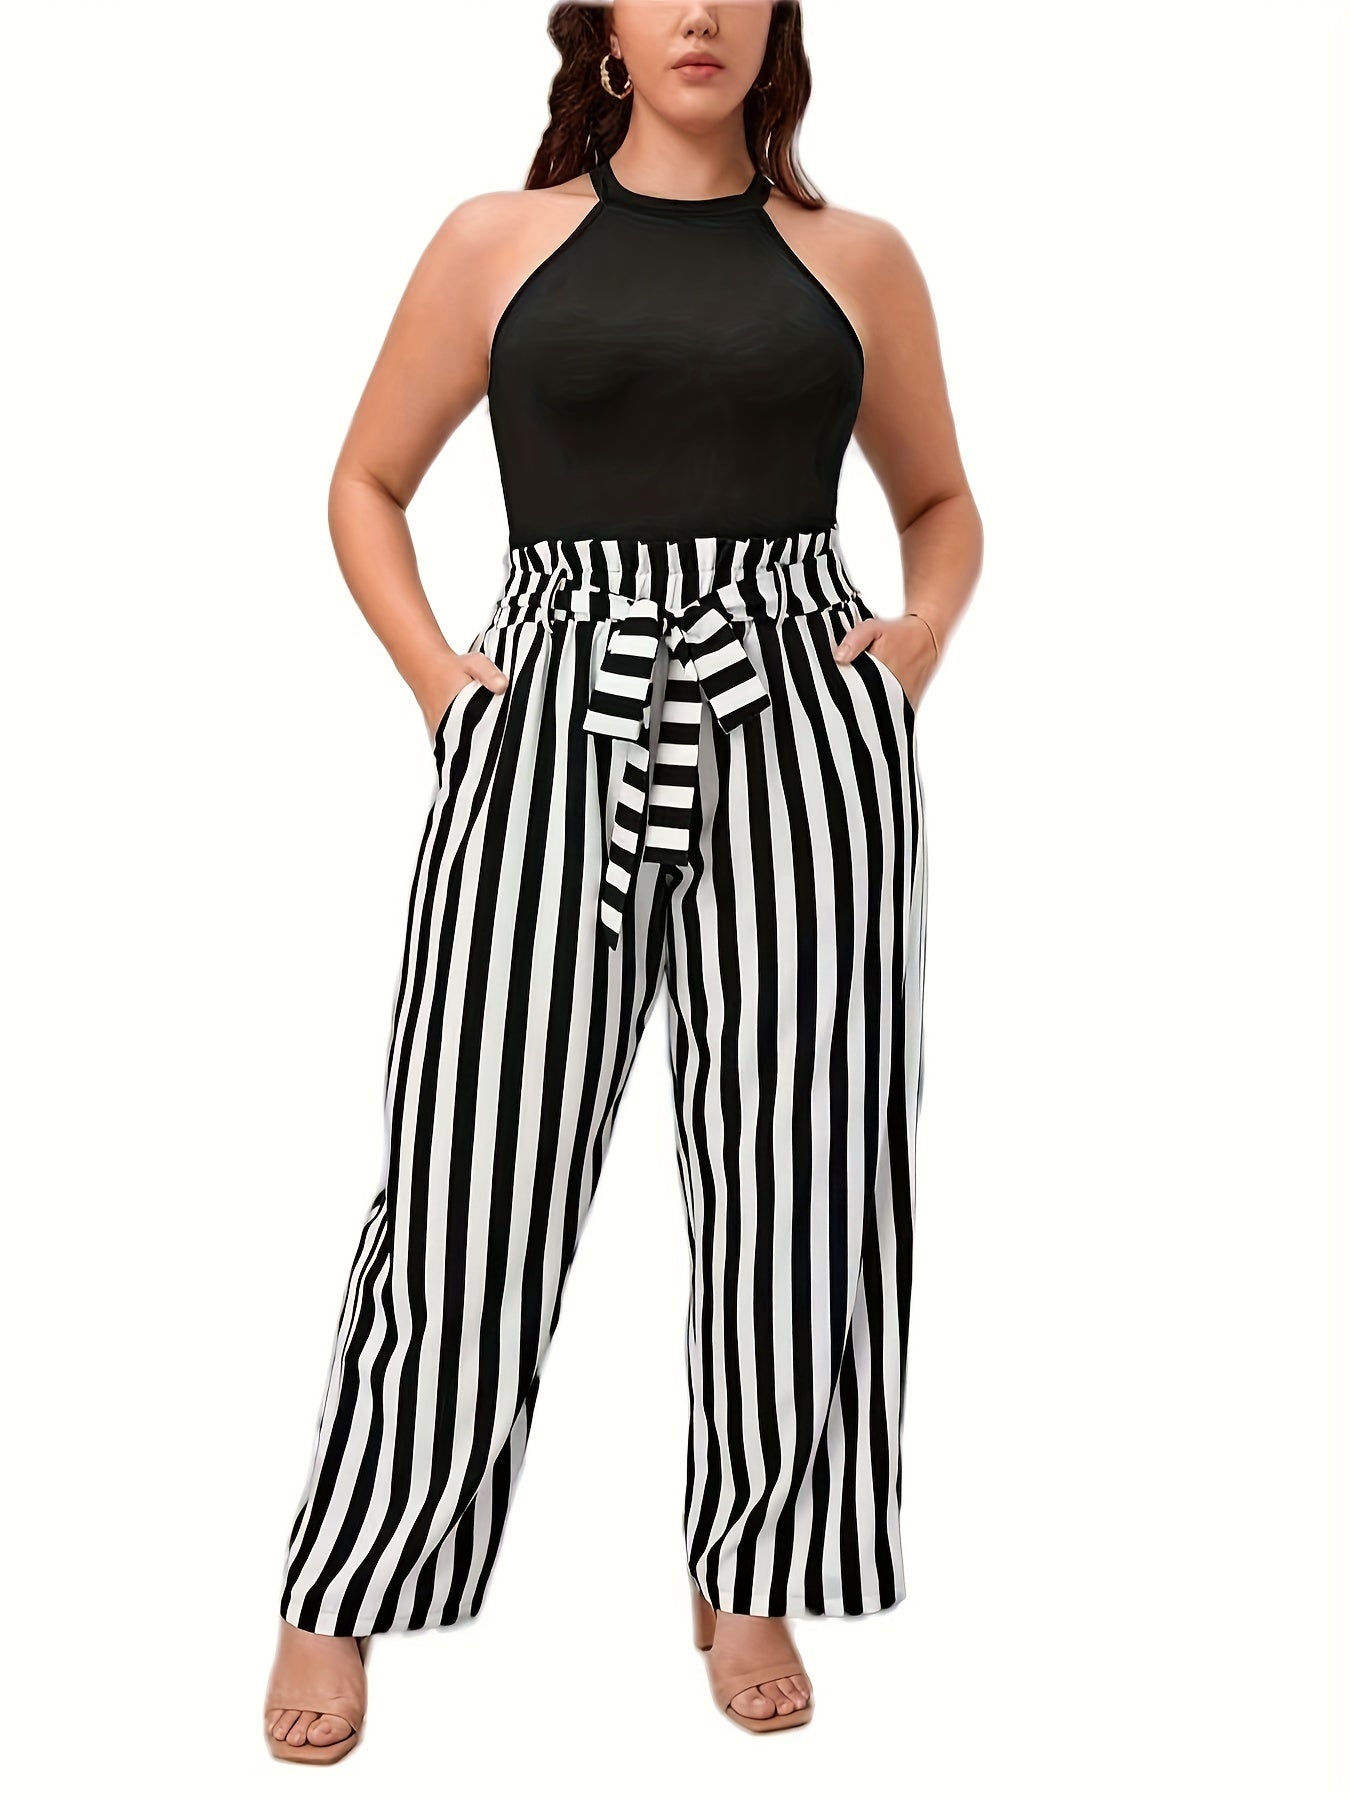 Plus Size Elegant Outfits Set, Women's Plus Solid Halter Neck Cami Top & Striped Pants With Belt Outfits Two Piece Set